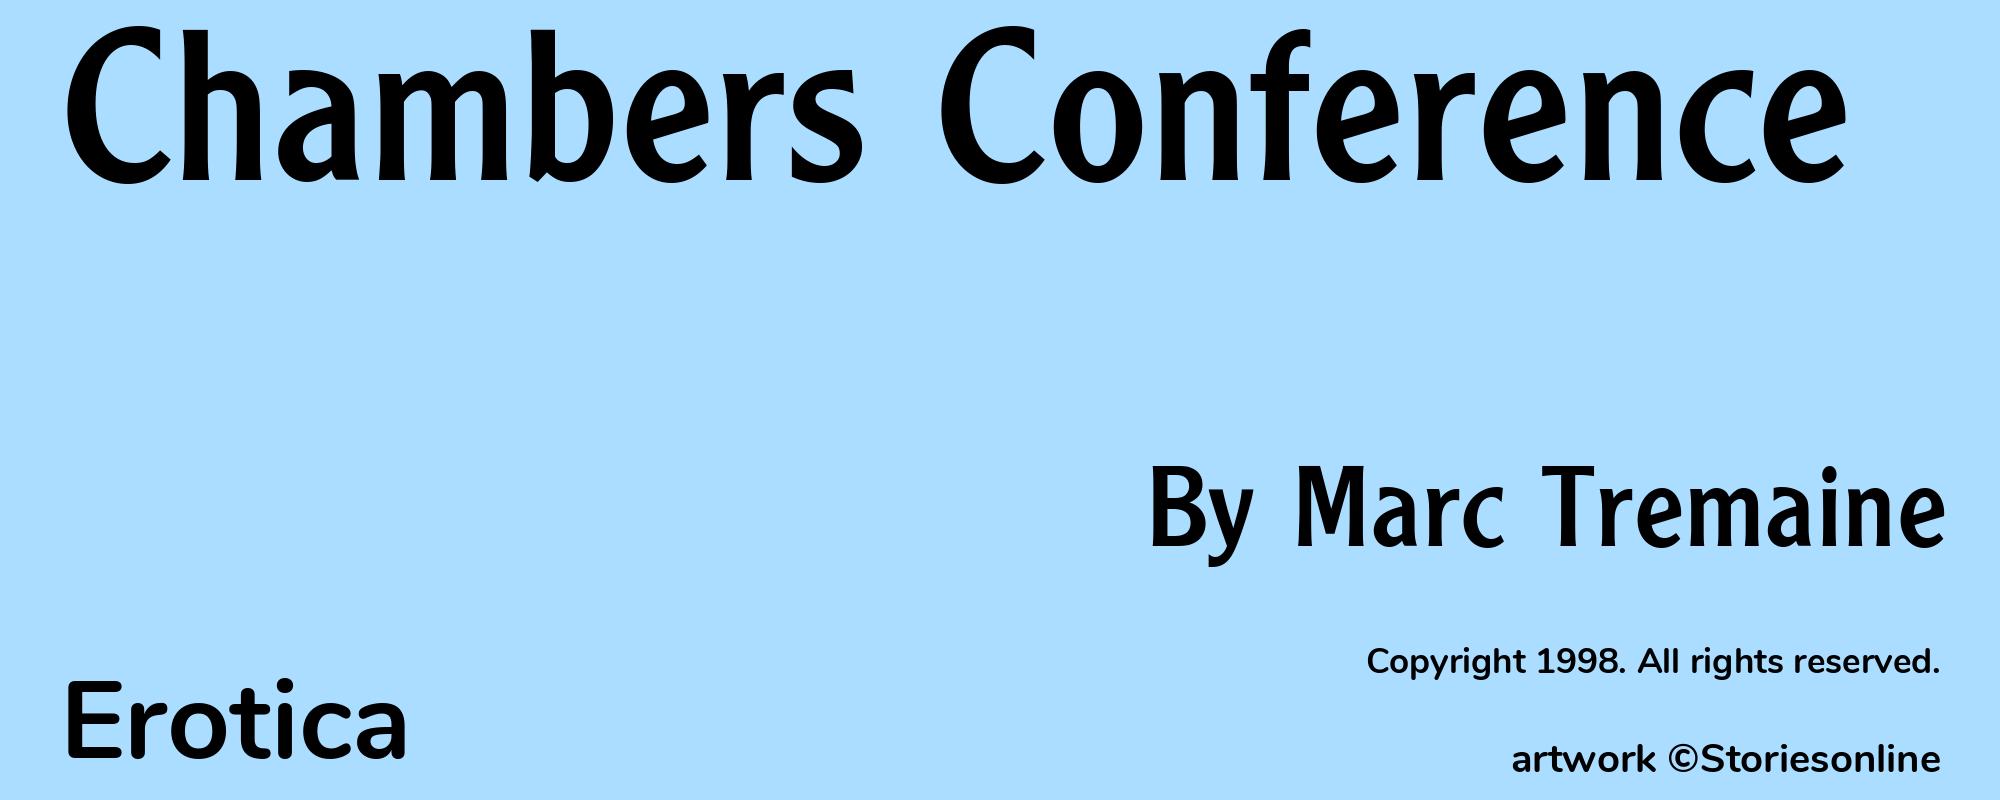 Chambers Conference - Cover